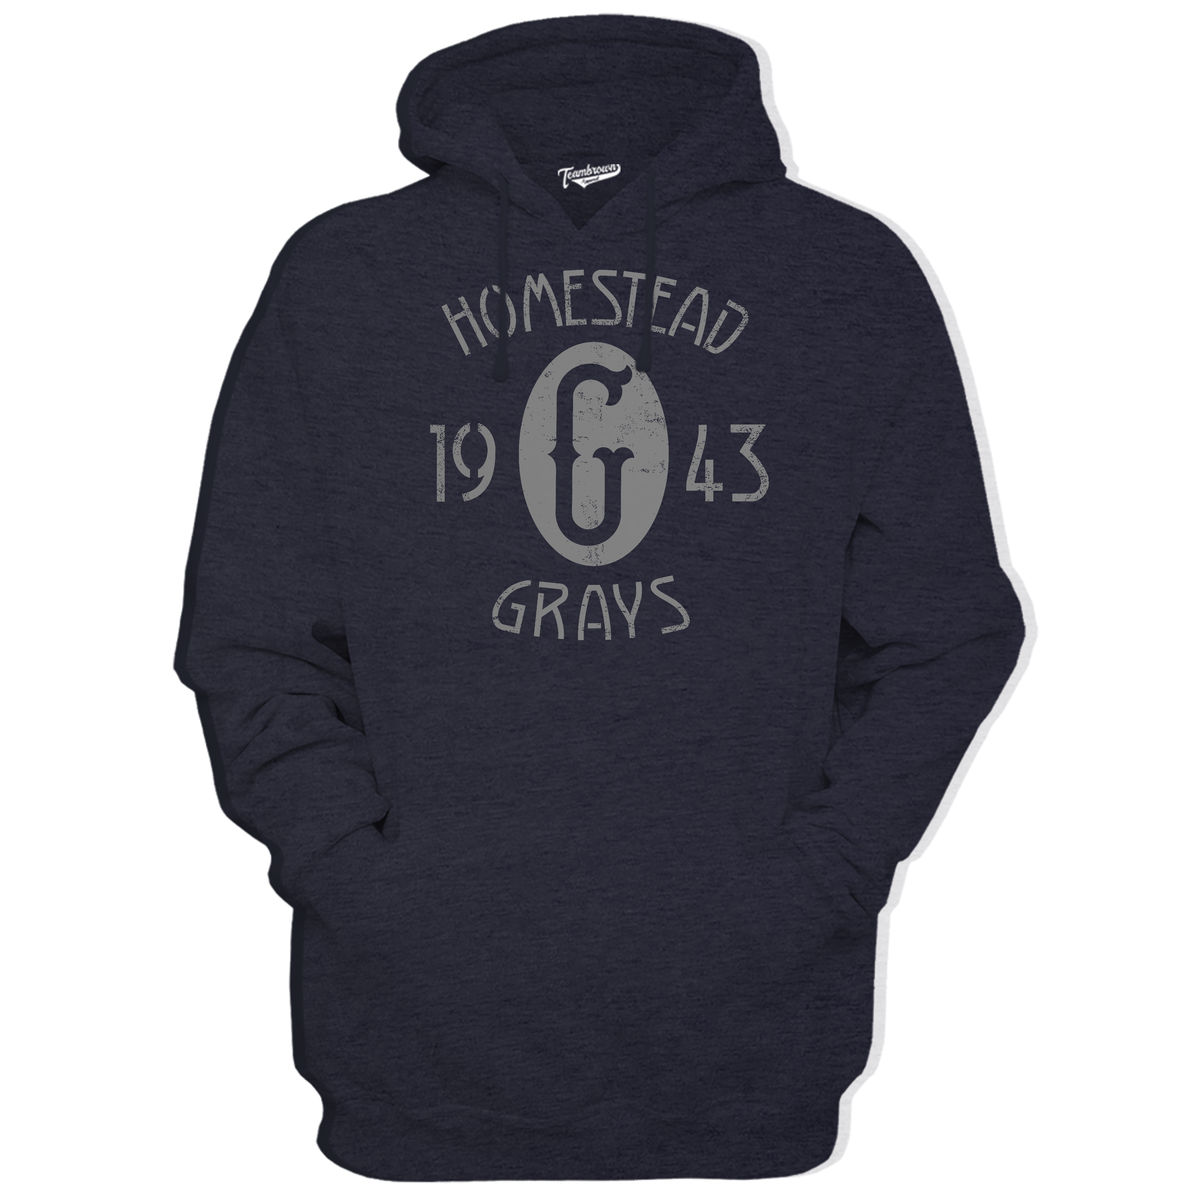 1943 Champions - Homestead Grays - Griffith Park - Unisex Premium Hoodie | Officially Licensed - NLBM